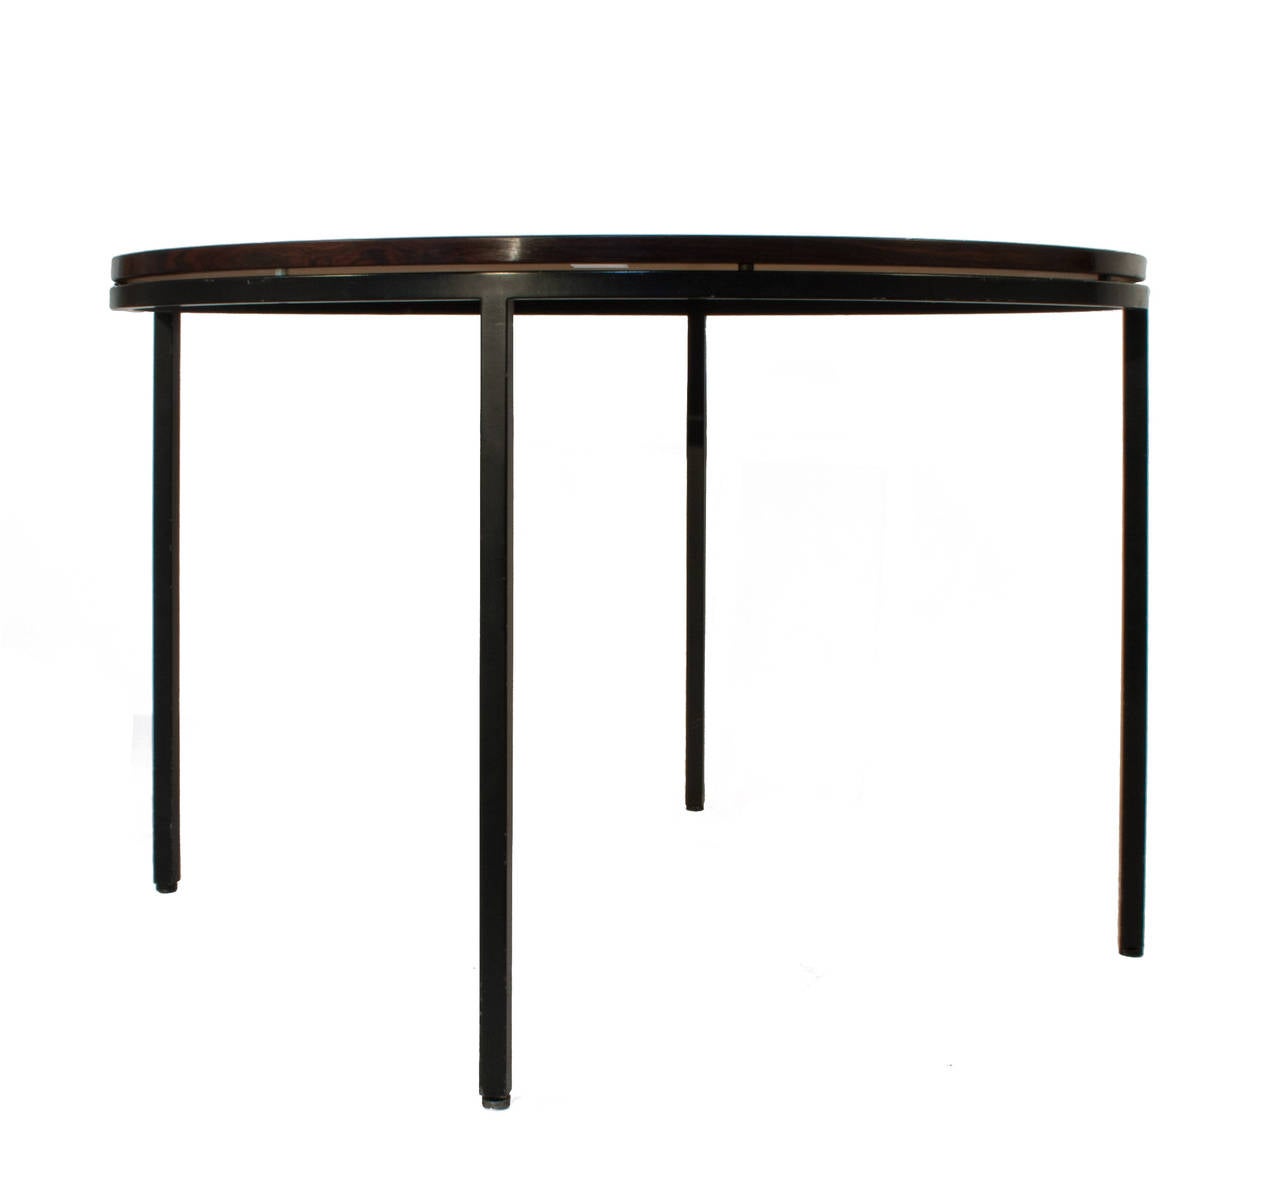 Round dining table with rosewood top on a black metal base by Mogens Koch.